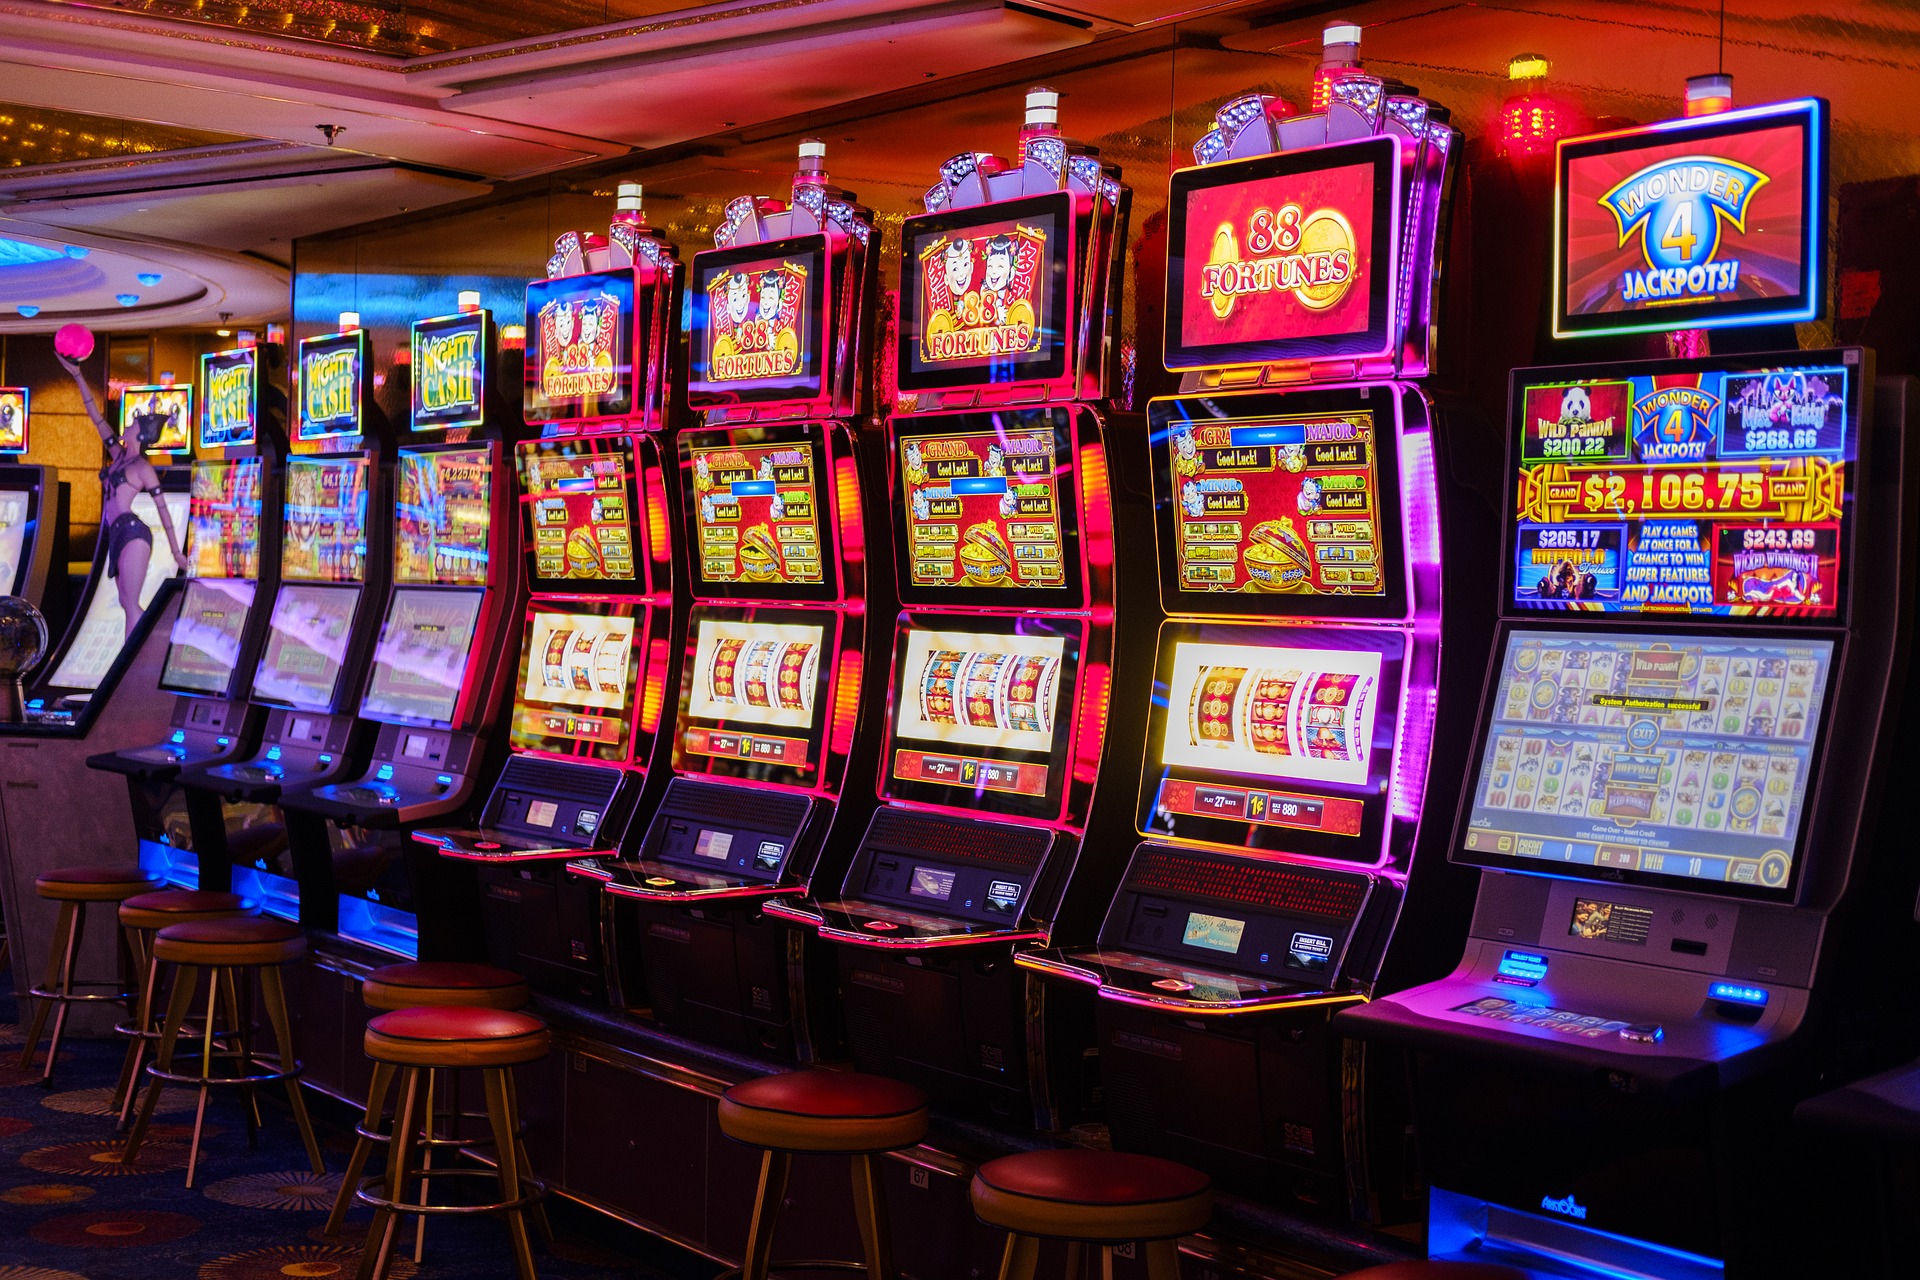 How to Spend Less Money On Online Slot Games